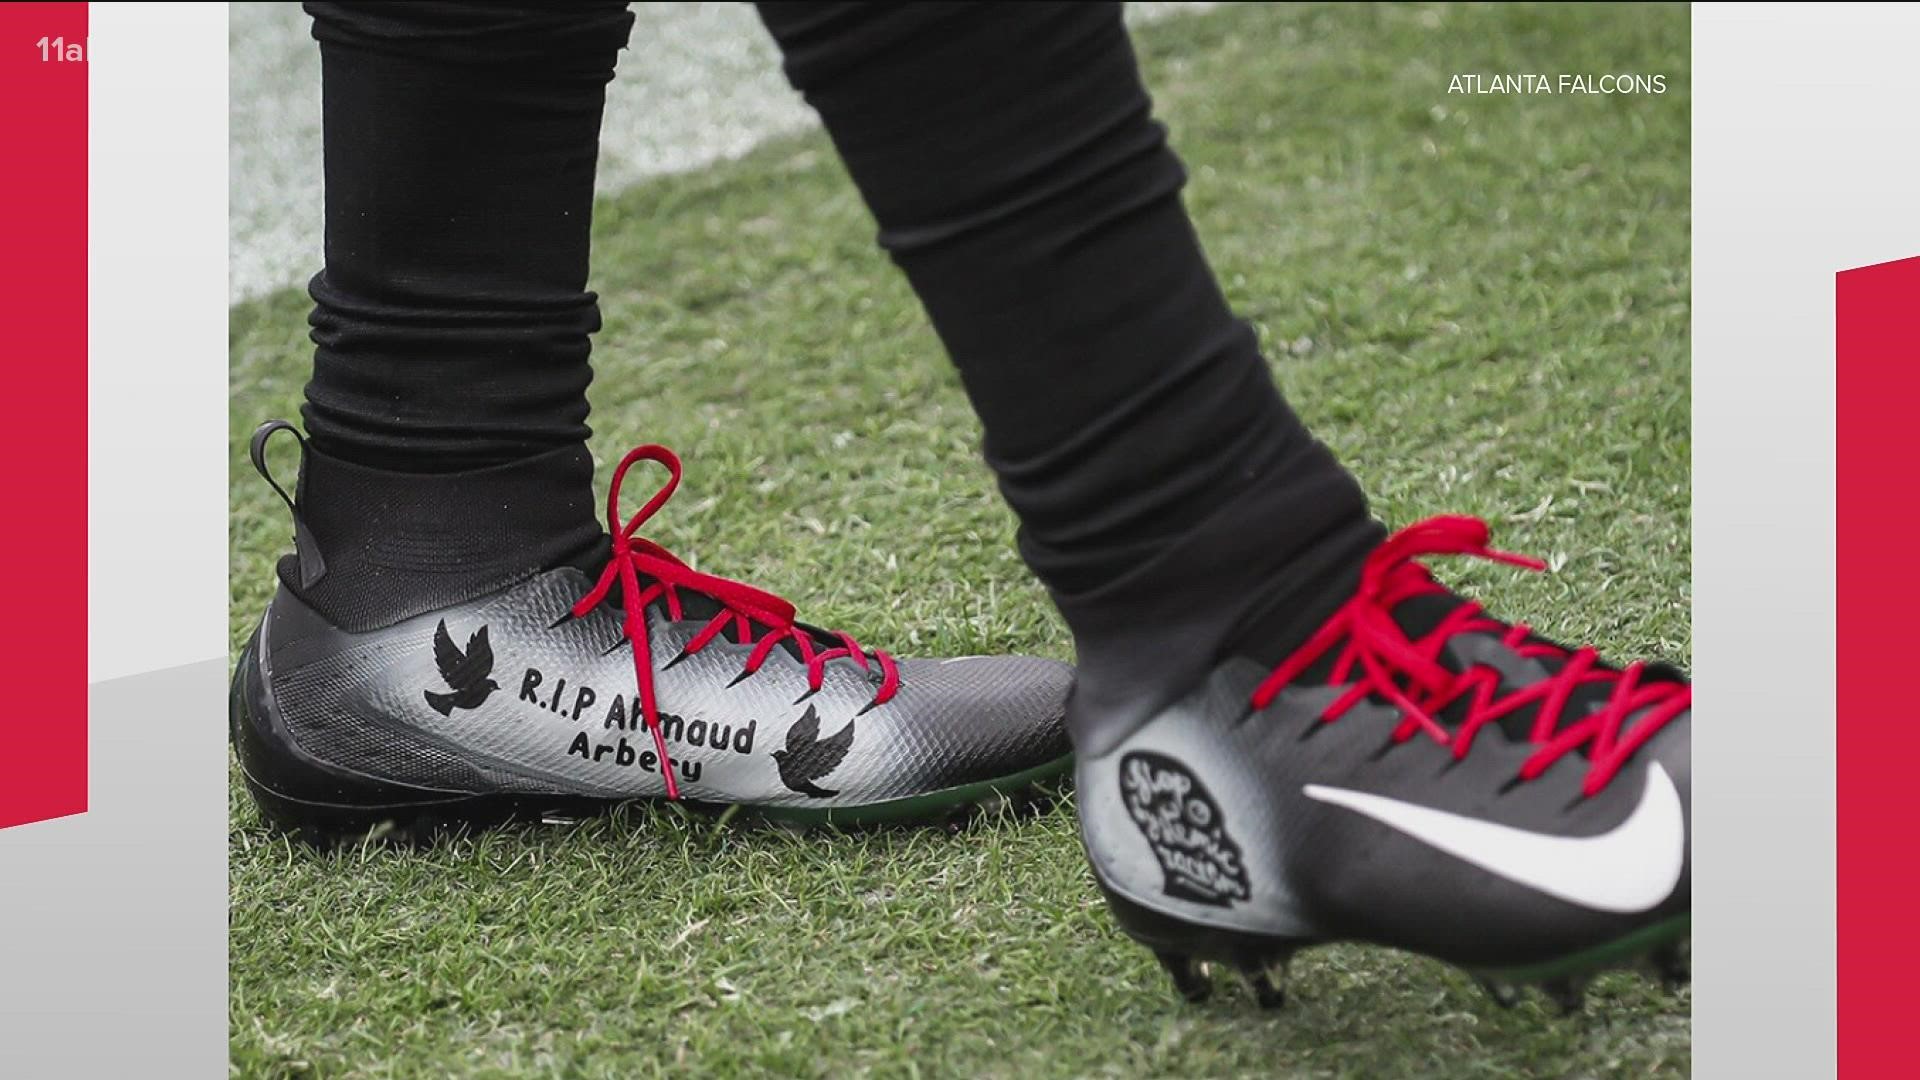 The football player wore the customized cleats during Sunday's game in Jacksonville, Florida.